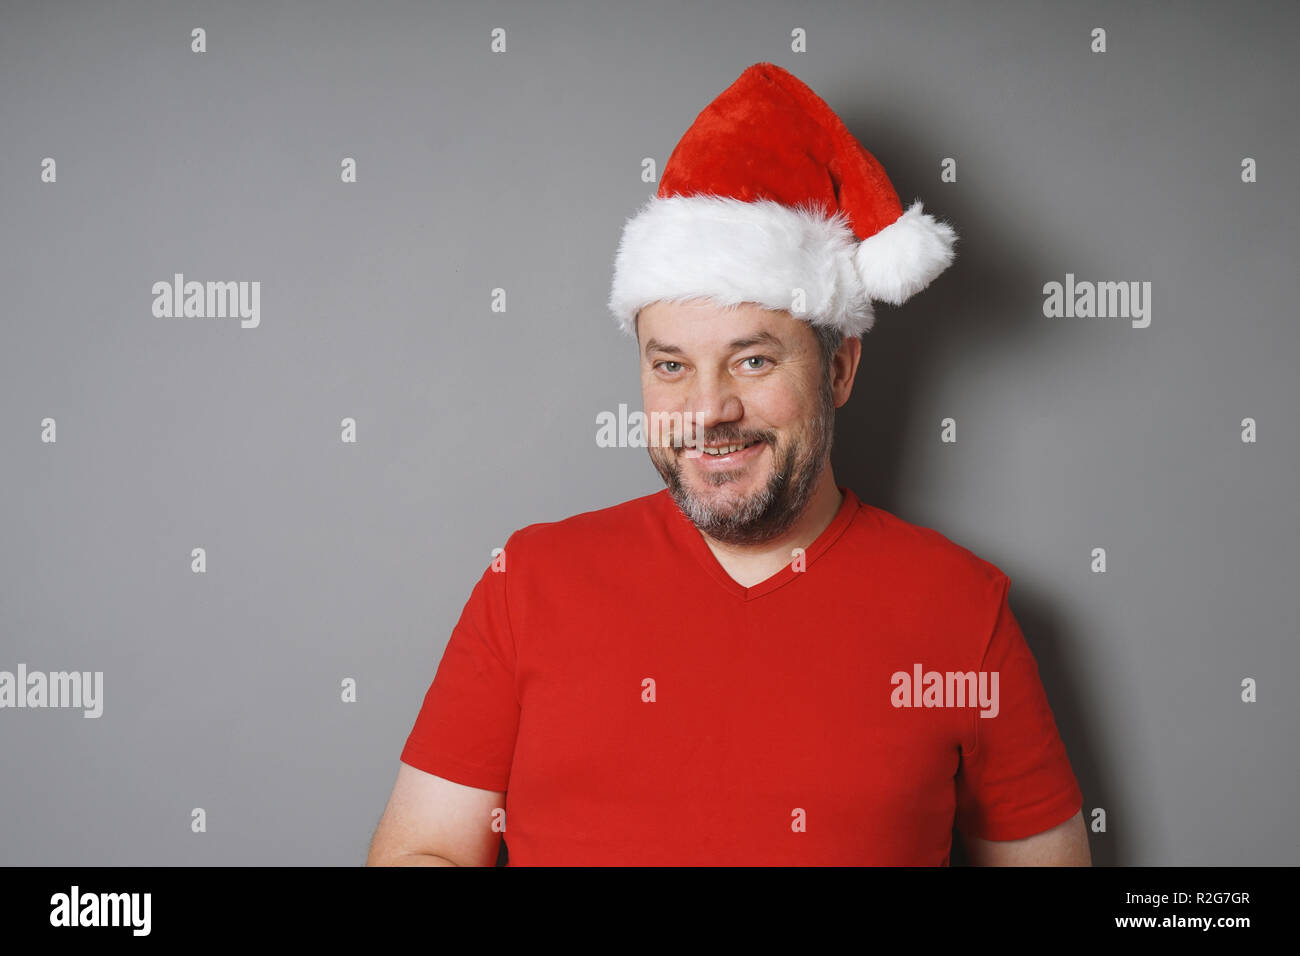 middle aged man wearing santa hat and red t-shirt Stock Photo